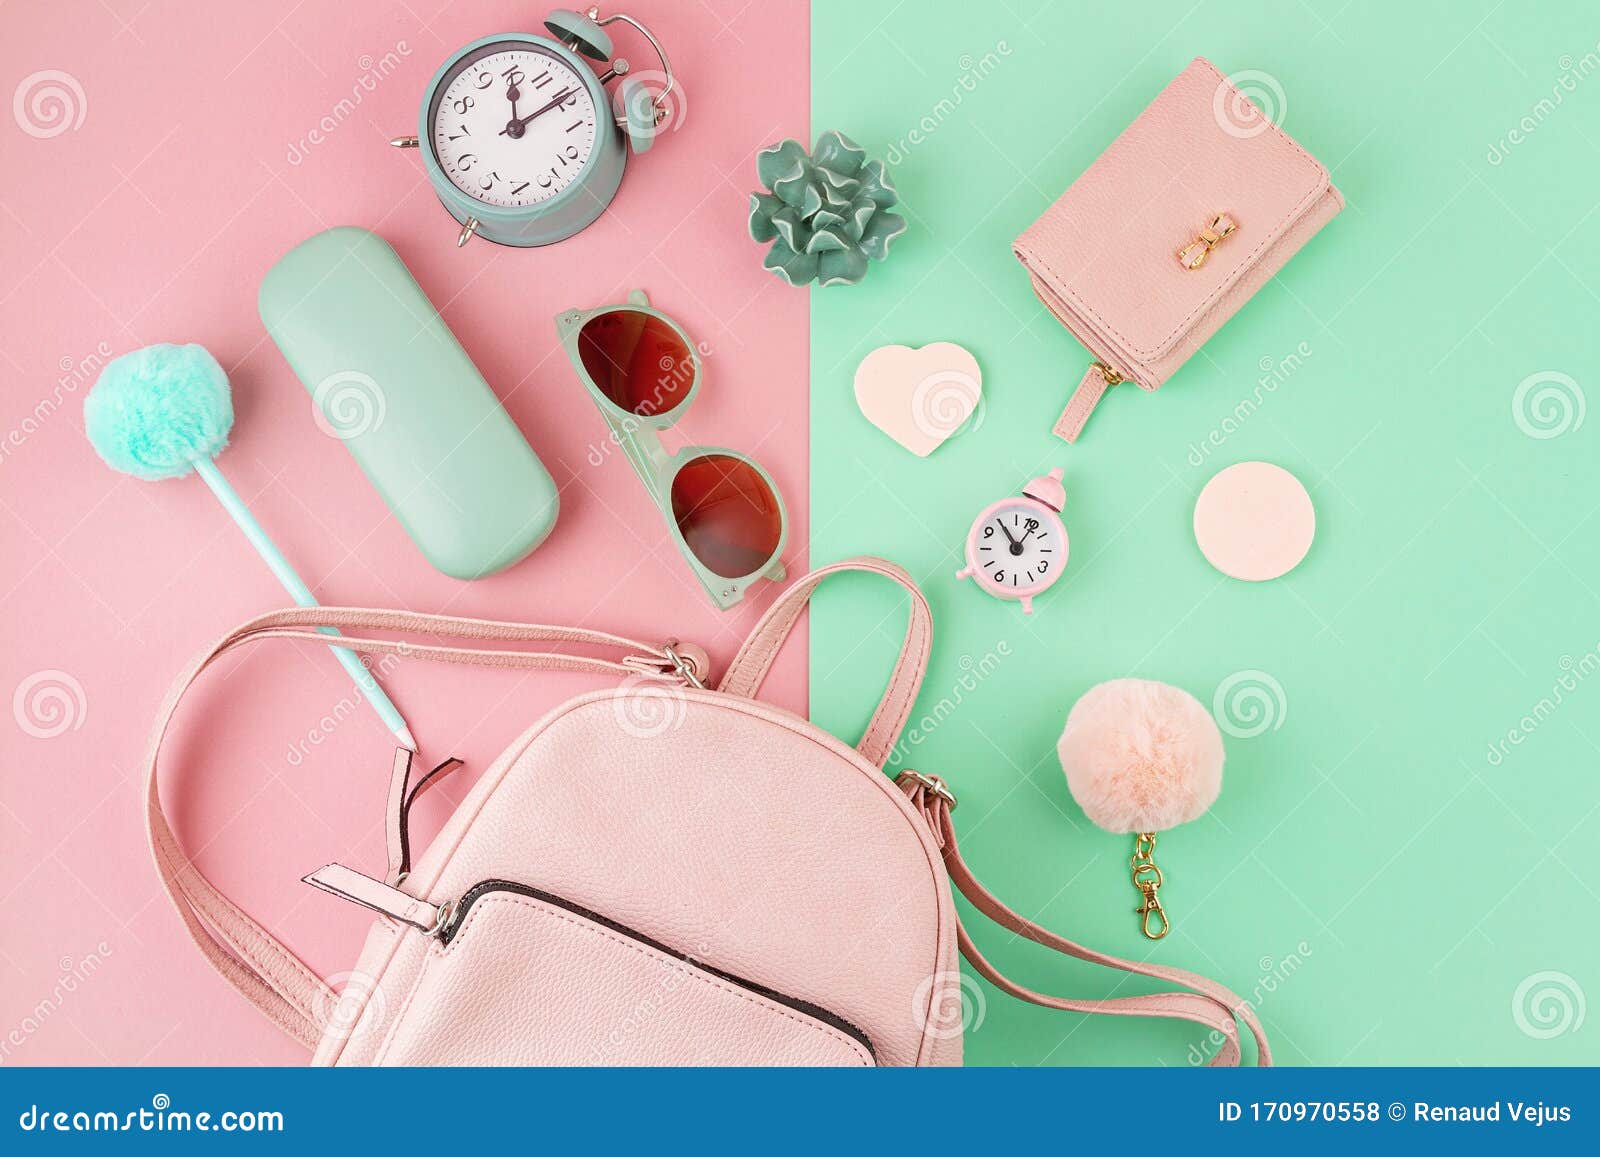 træk uld over øjnene Betsy Trotwood ulovlig Flat Lay with Girls Hand Bag and Accessories in Pink and Mint Colors Stock  Photo - Image of pink, accessory: 170970558